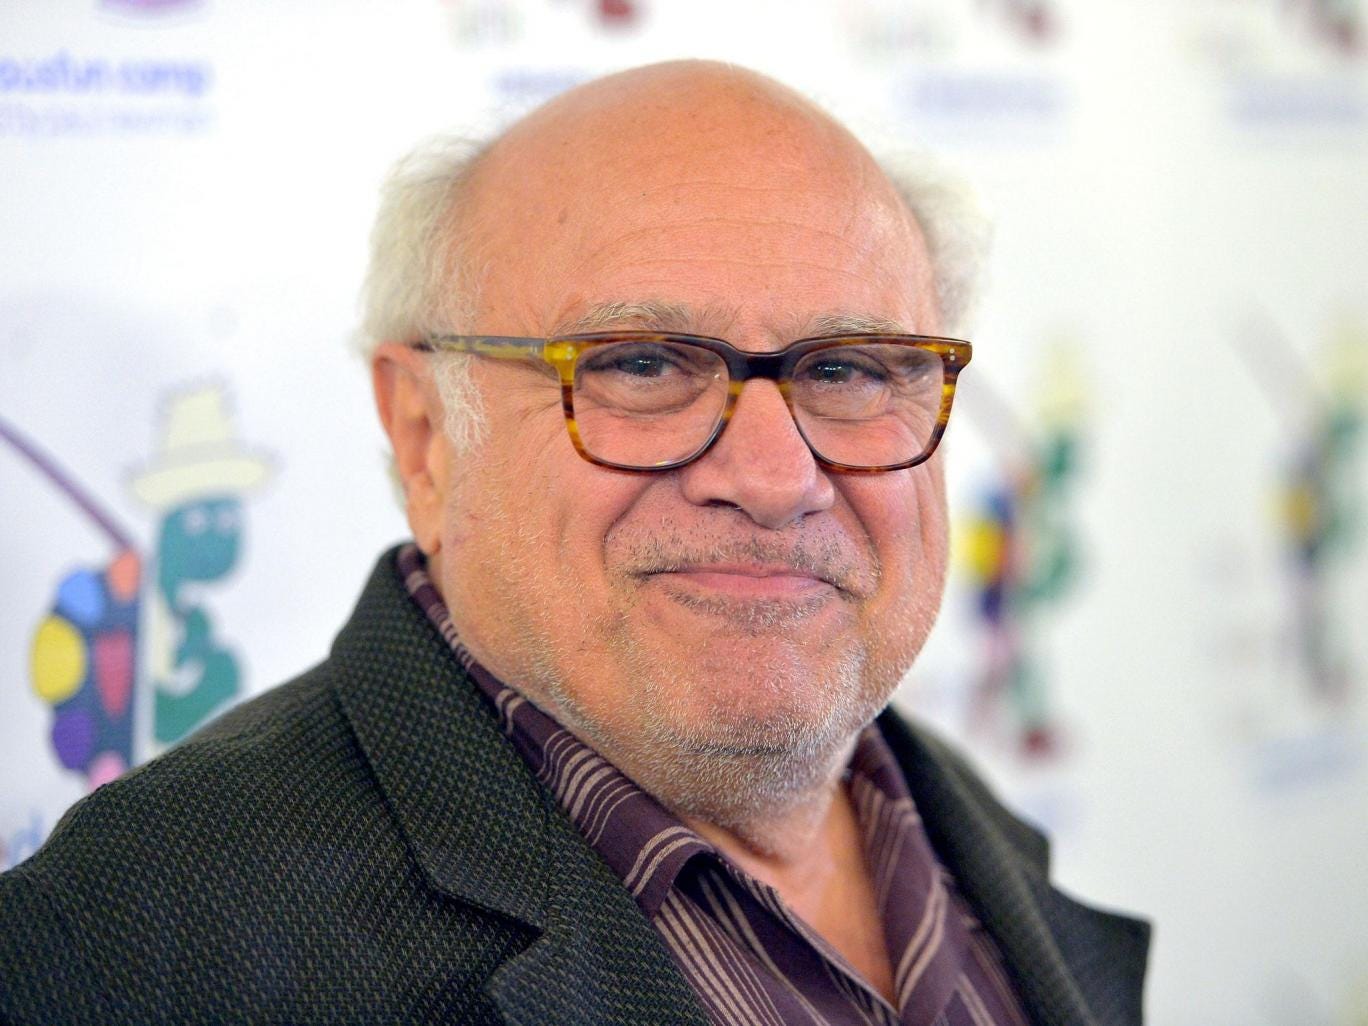 http://static.independent.co.uk/s3fs-public/styles/story_large/public/thumbnails/image/2014/10/14/10/Danny-DeVito.jpg